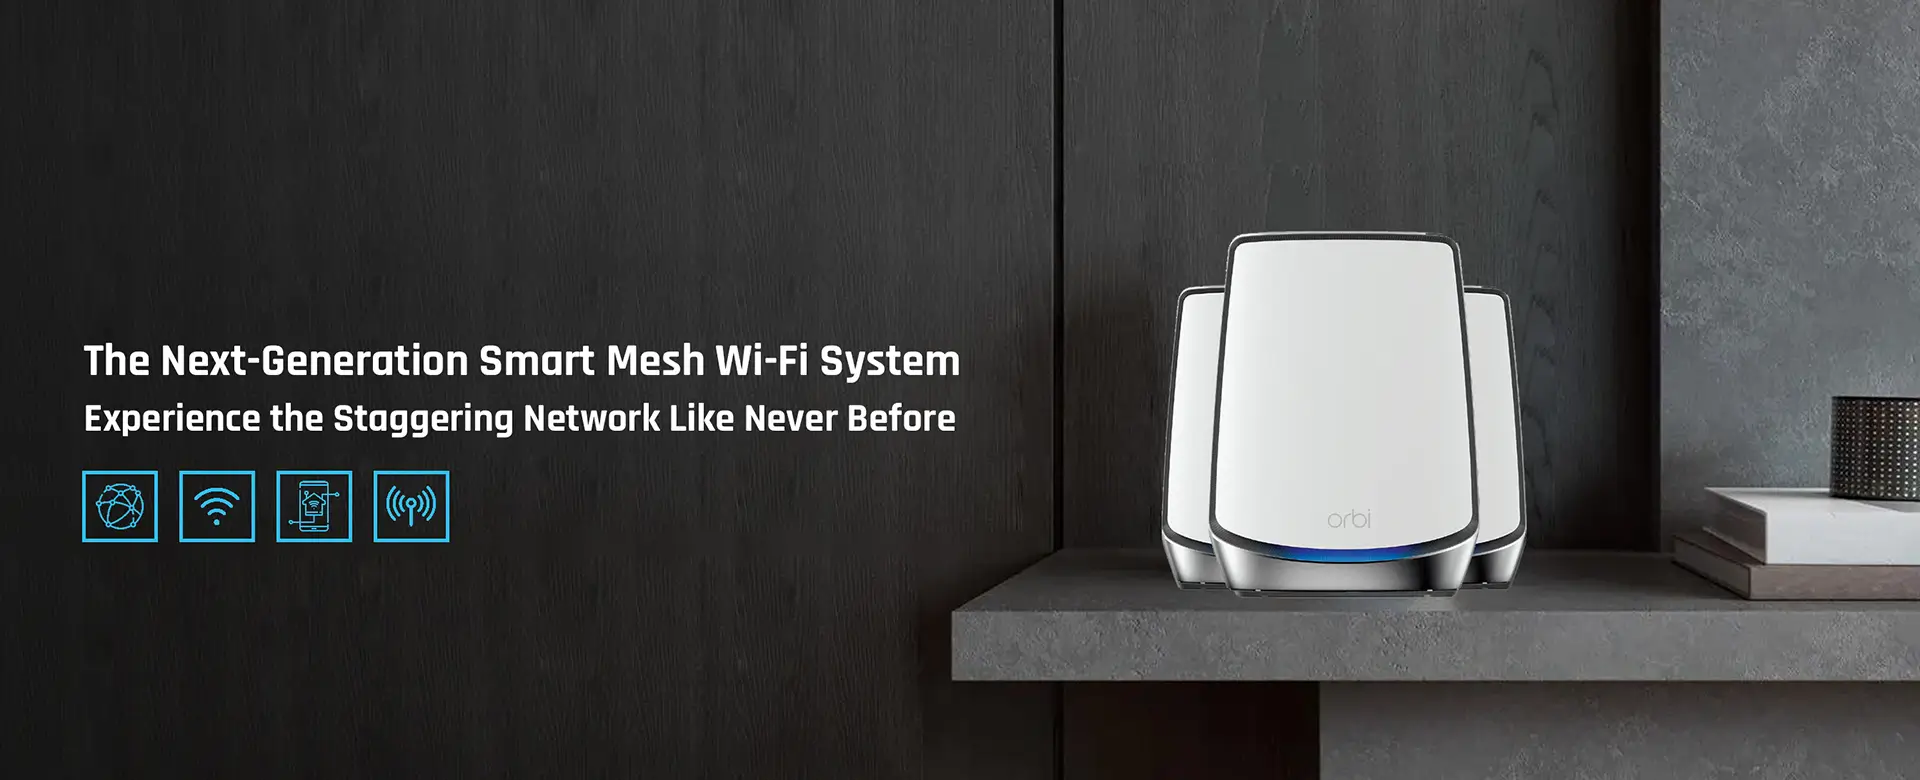 Orbi Router home Page banner